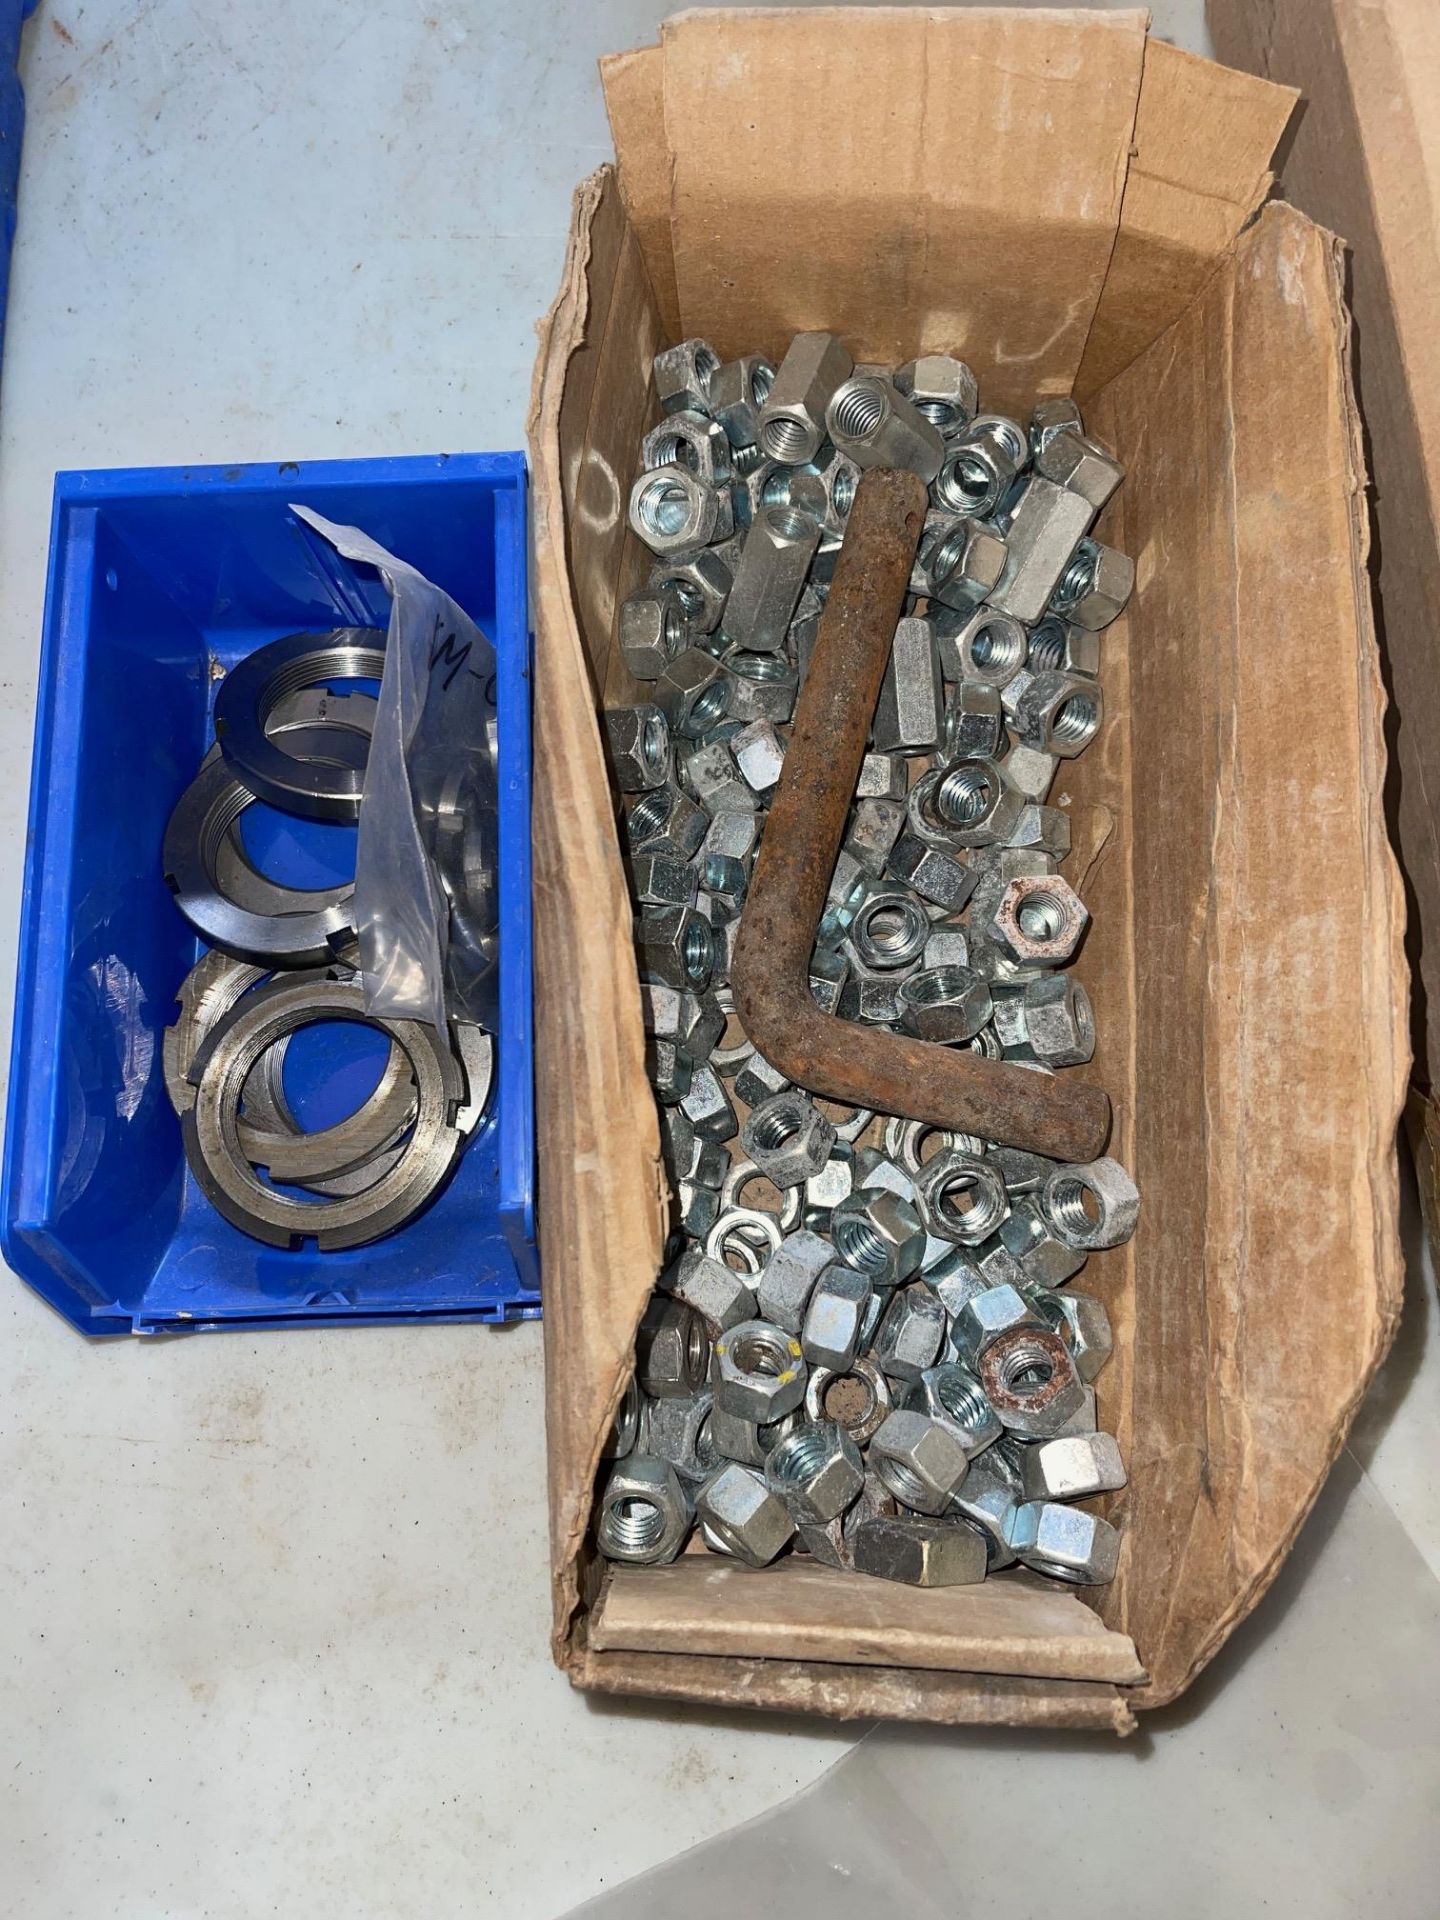 LOT OF A WIDE VARIETY OF NUTS, RANGE 1/4” - 1 “, RIGGING FEE $25.00 - Image 10 of 12